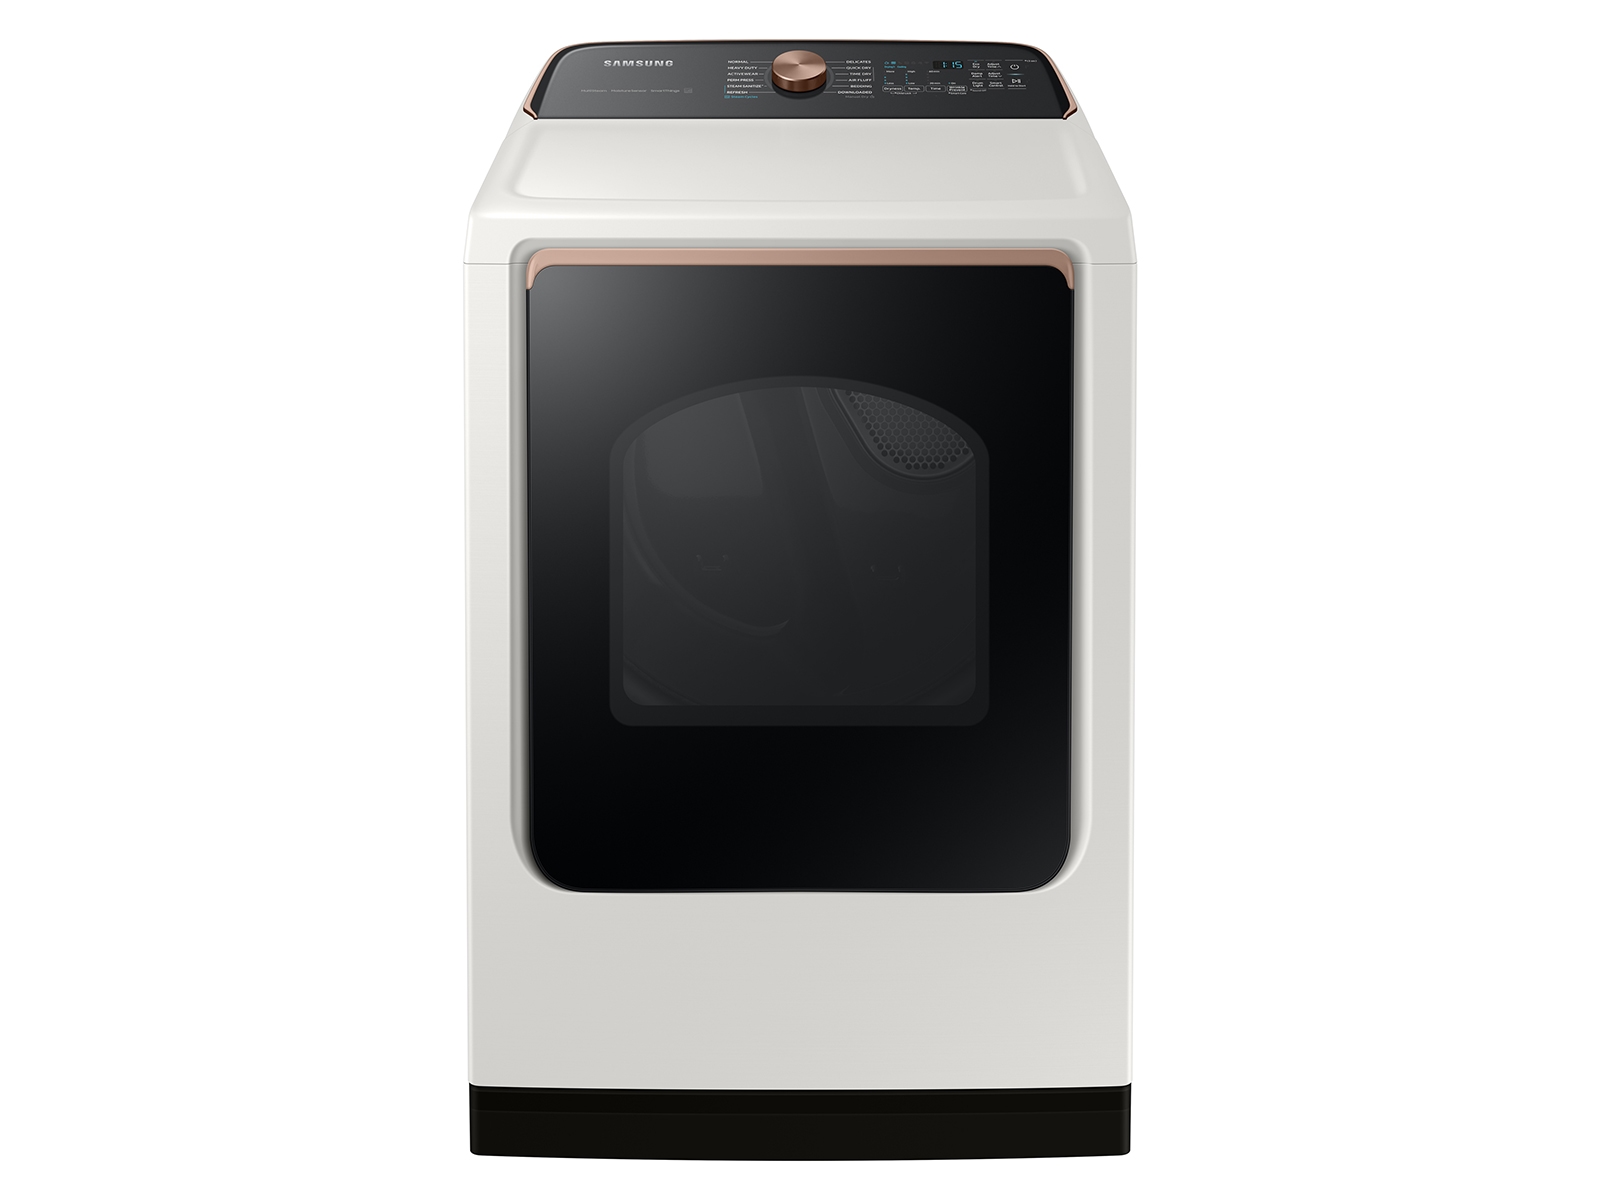 Photos - Tumble Dryer Samsung 7.4 cu. ft. Smart Gas Dryer with Steam Sanitize+ in Ivory(DVG55CG7 